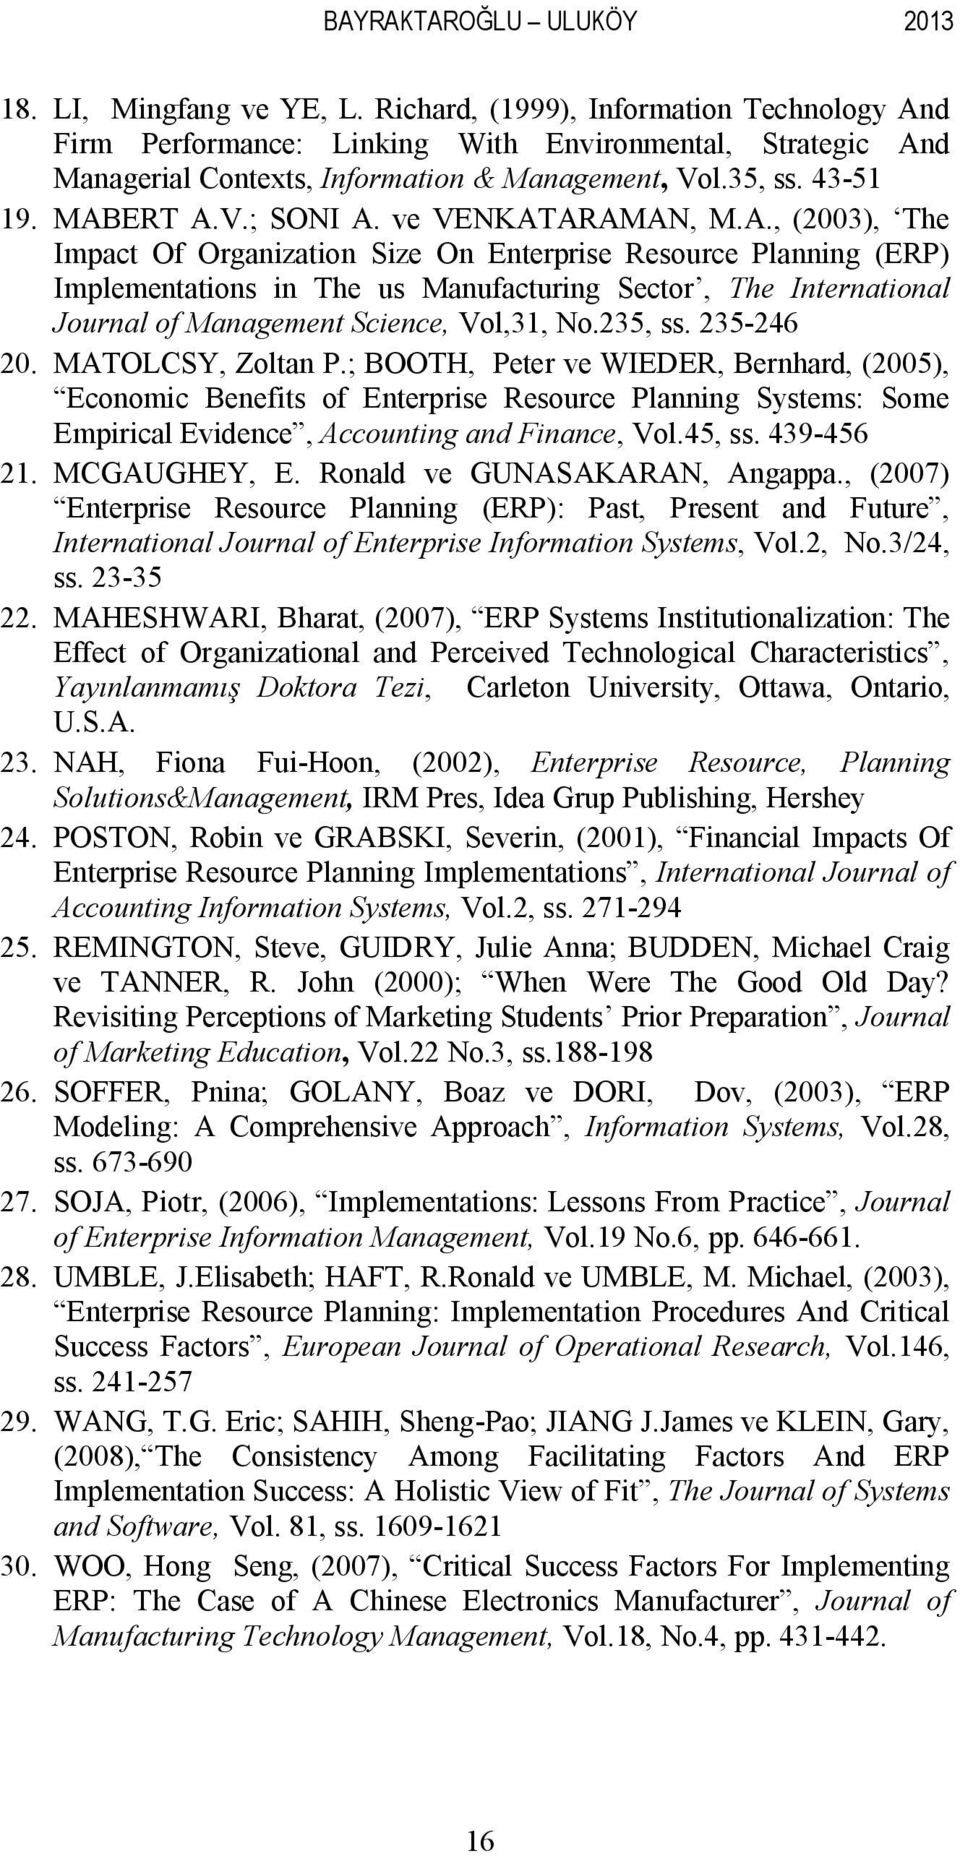 ve VENKATARAMAN, M.A., (2003), The Impact Of Organization Size On Enterprise Resource Planning (ERP) Implementations in The us Manufacturing Sector, The International Journal of Management Science, Vol,31, No.